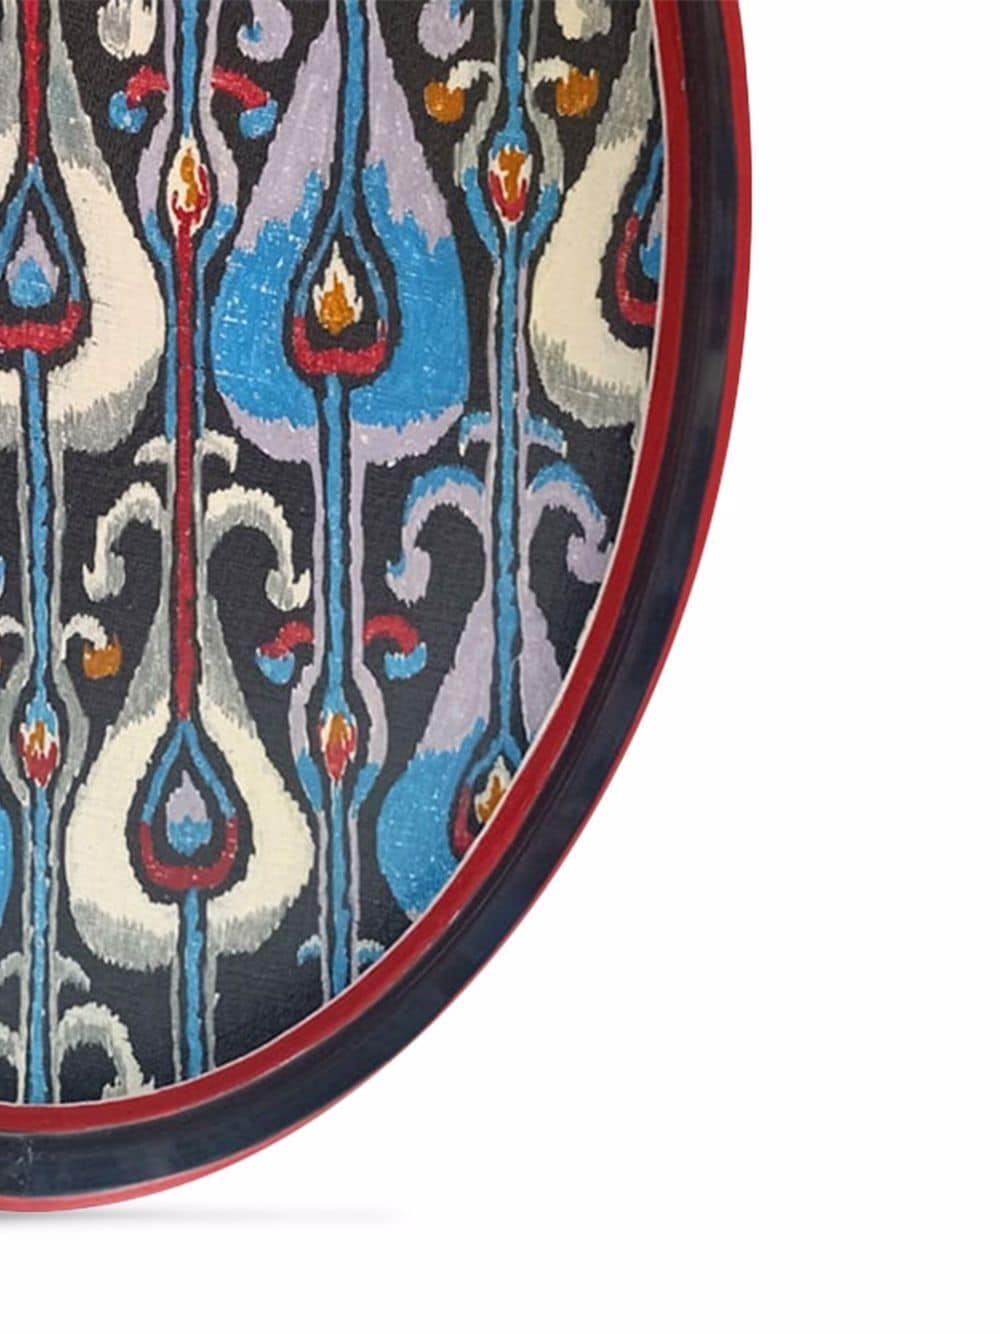 Shop Les-ottomans Ikat Hand-painted Oval Tray In Multicolour